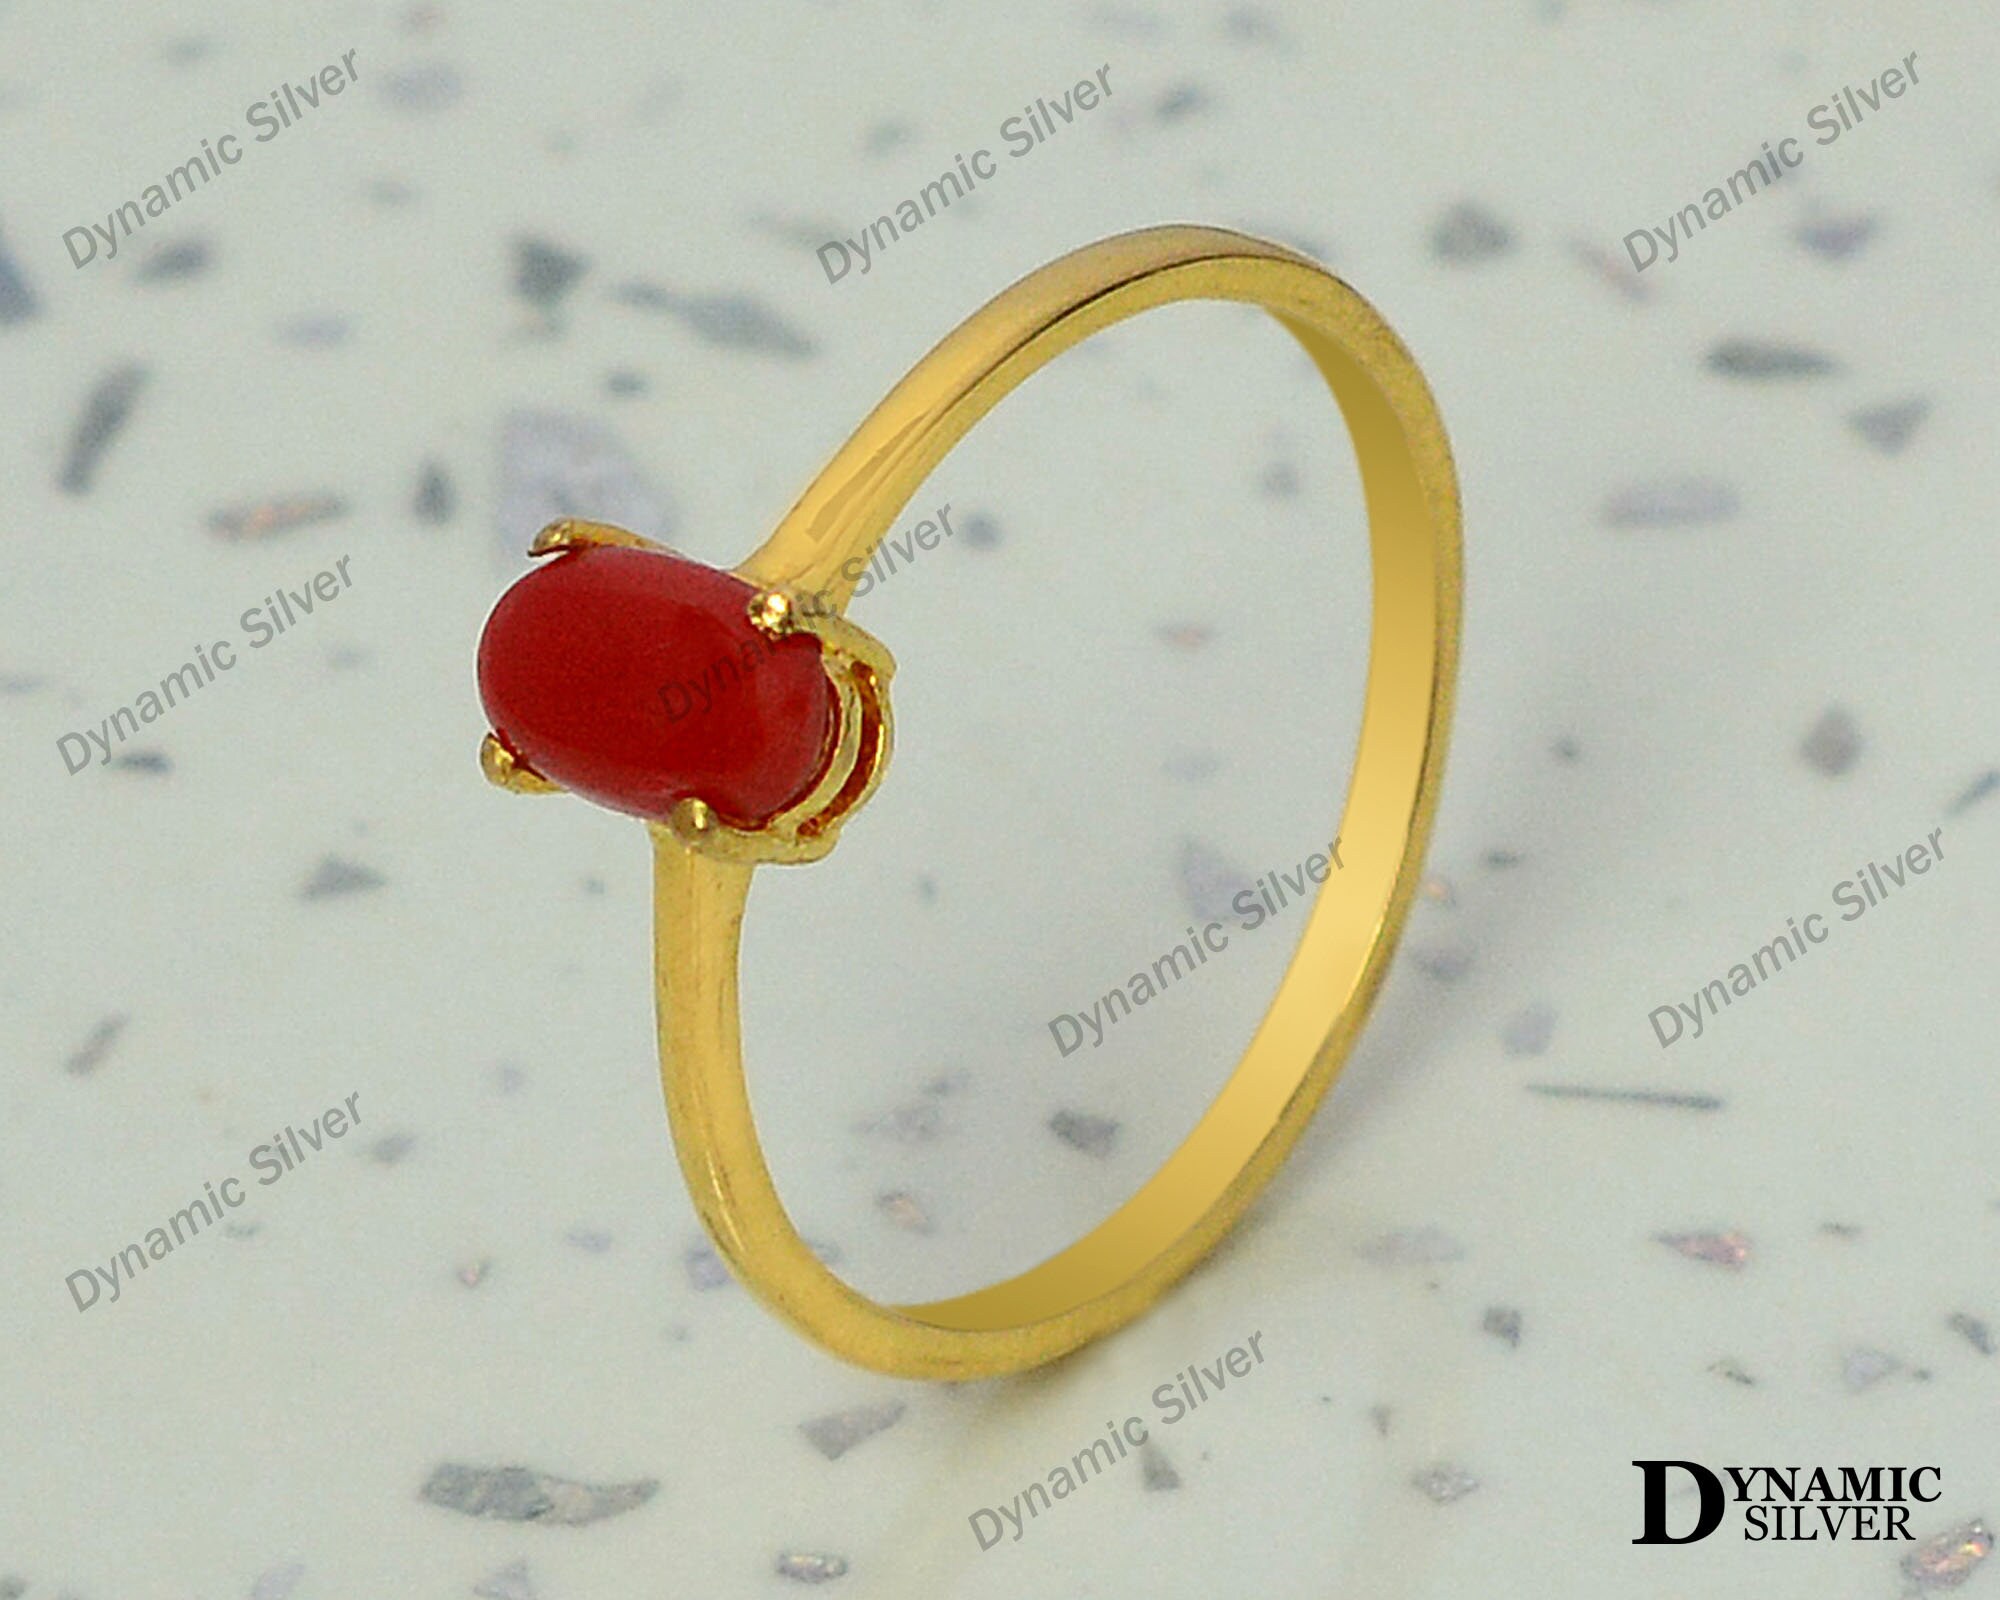 5.75 Ct Certified Natural Italian Red Coral Ring In 925 Sterling Silver